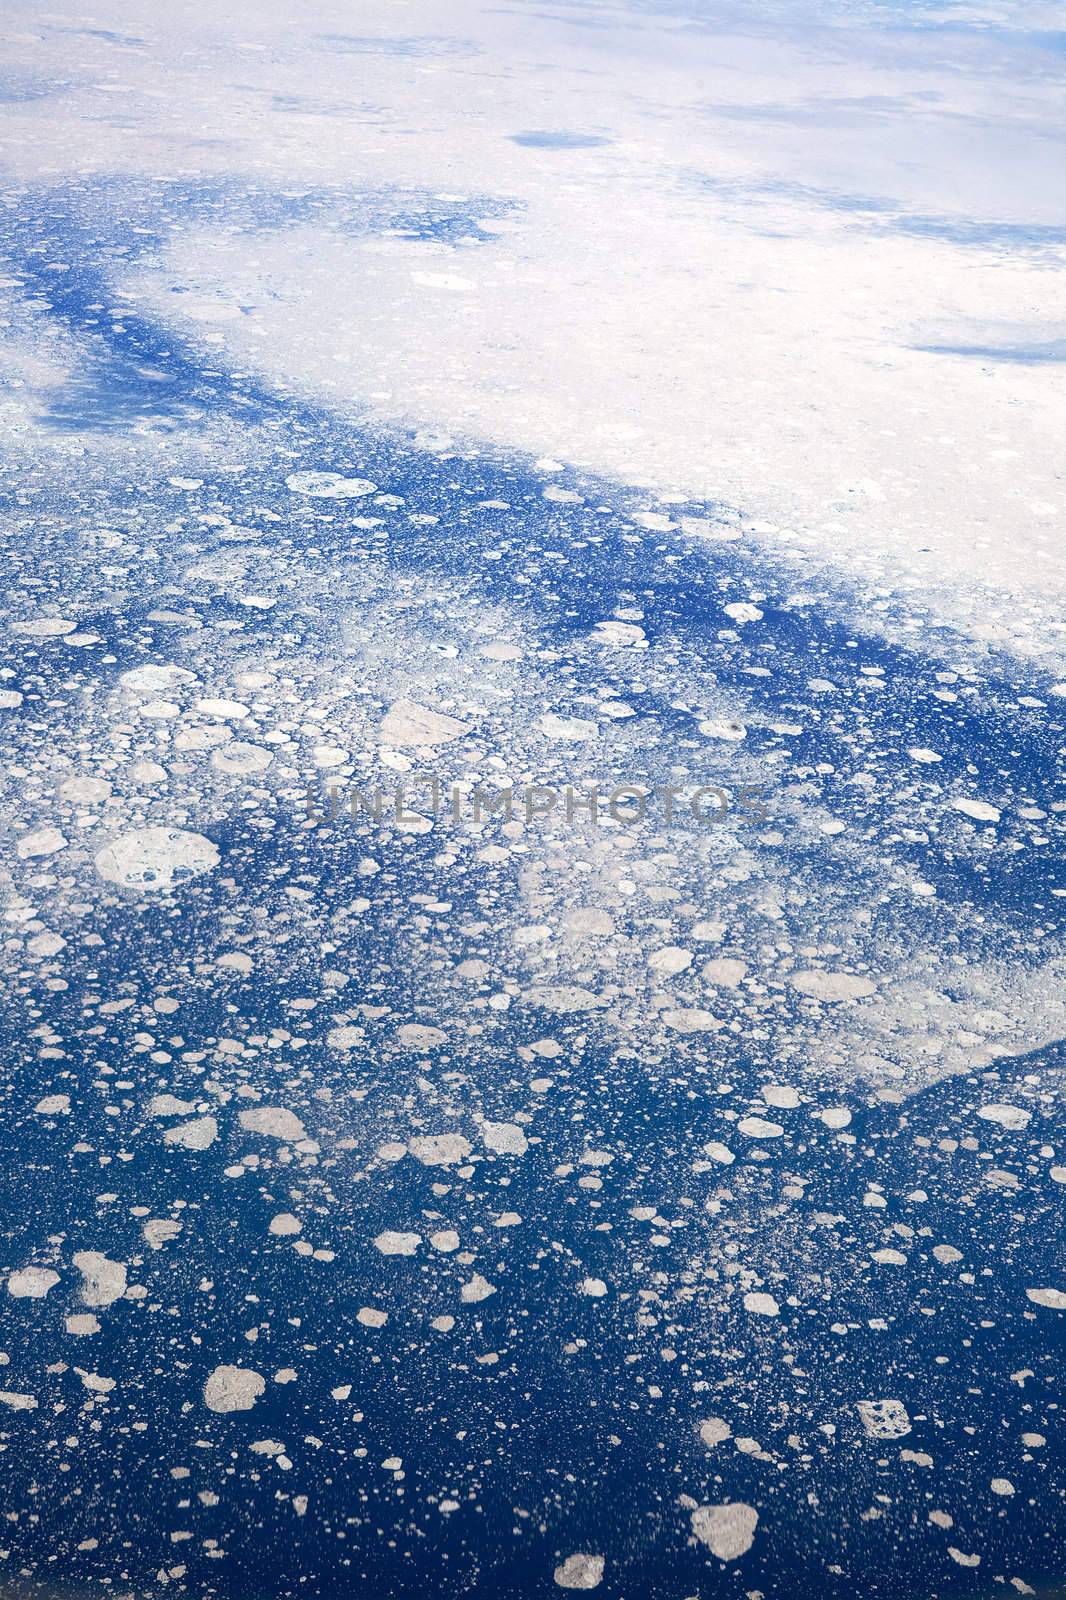 An aerial view of a melting glacier in the ocean.